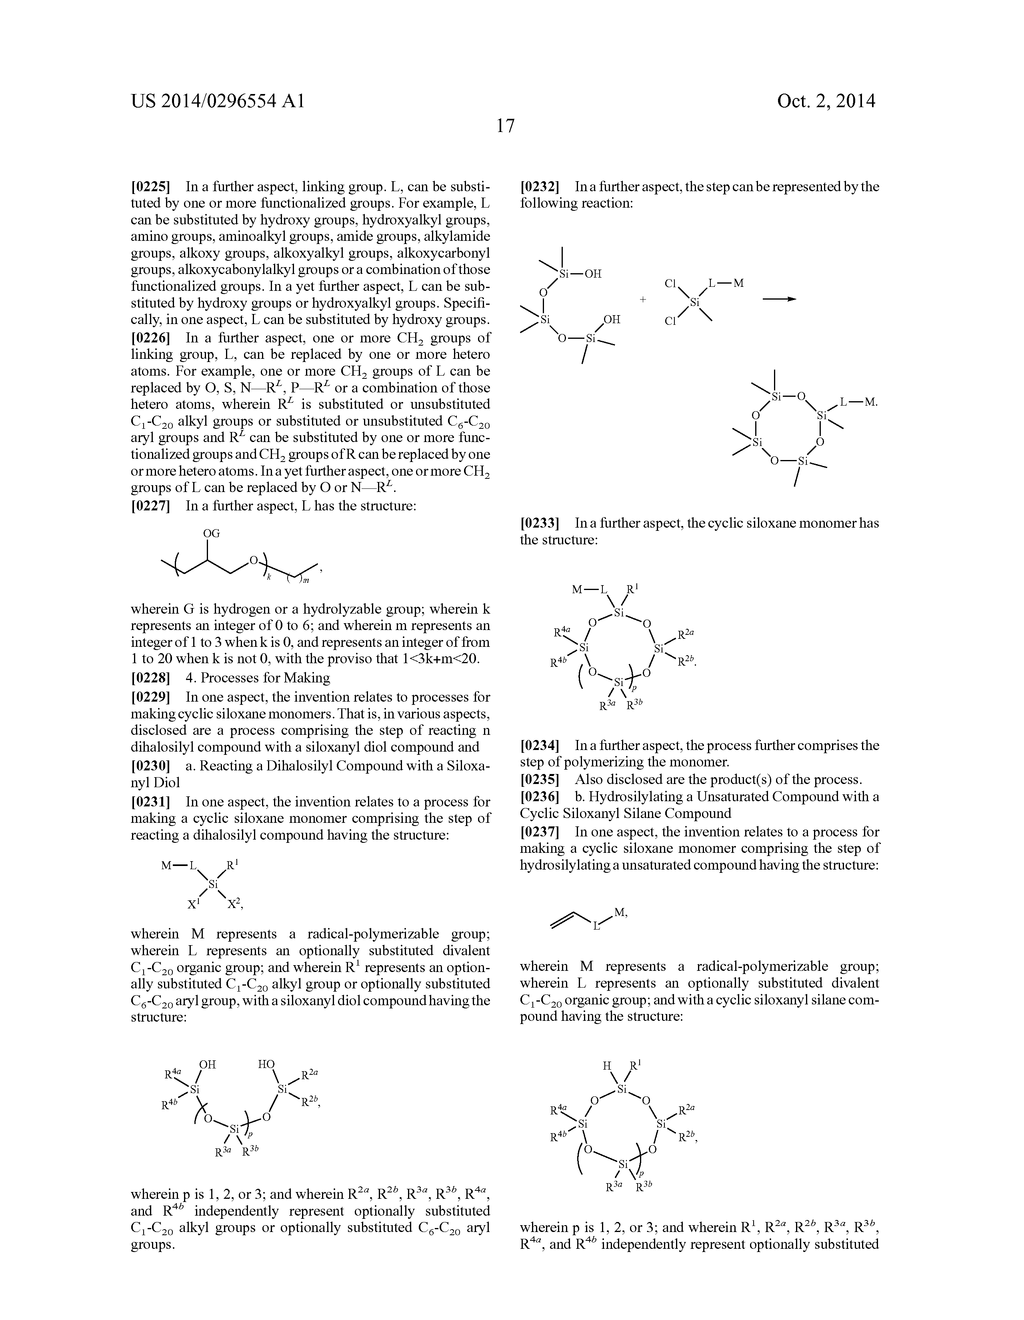 HYDROLYSIS-RESISTANT SILICONE COMPOUNDS - diagram, schematic, and image 20